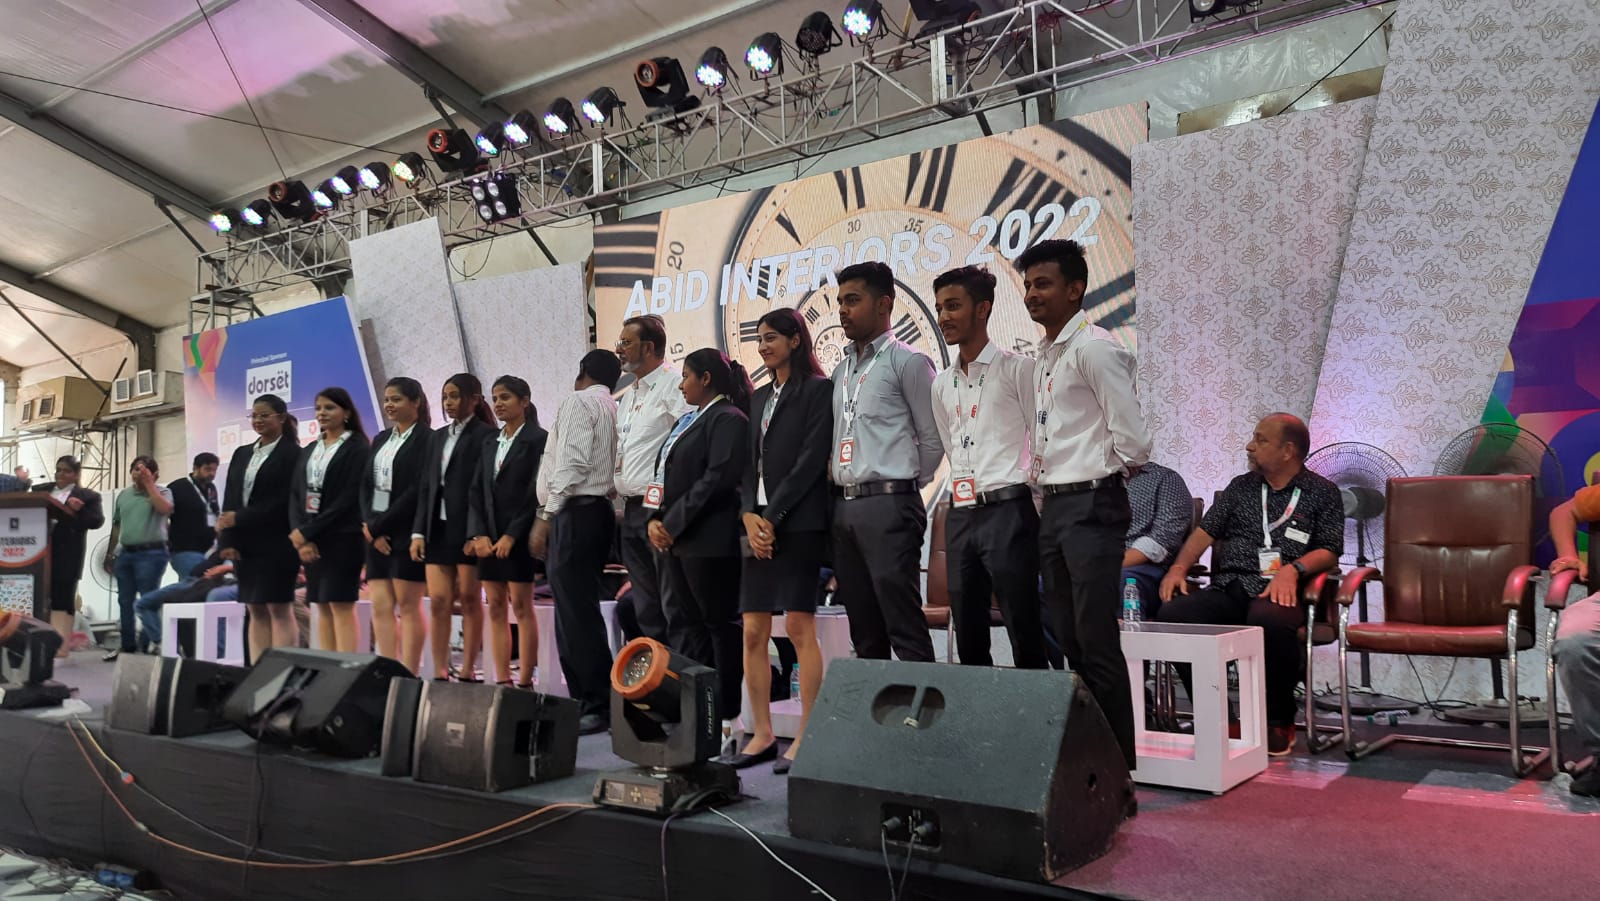 Students on stage after participating in INIFT Interior Design event